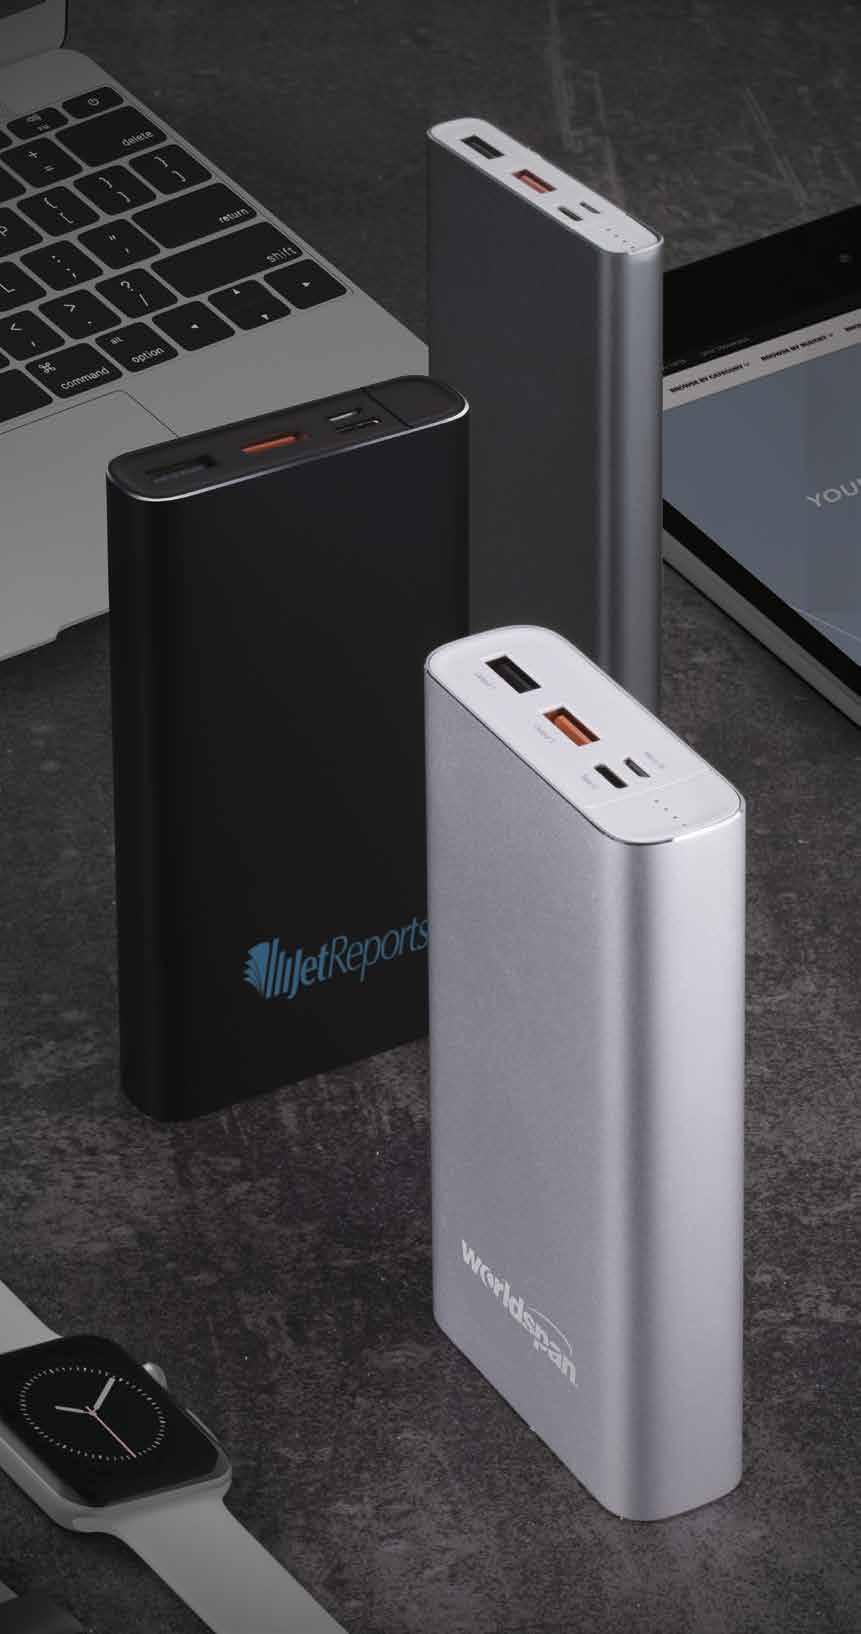 12 power bank supercharger power tank PC5029 *Deluxe gift box included This 10,000 mah power bank has a durable metallic exterior with a Type C input/ output for the speediest charging!